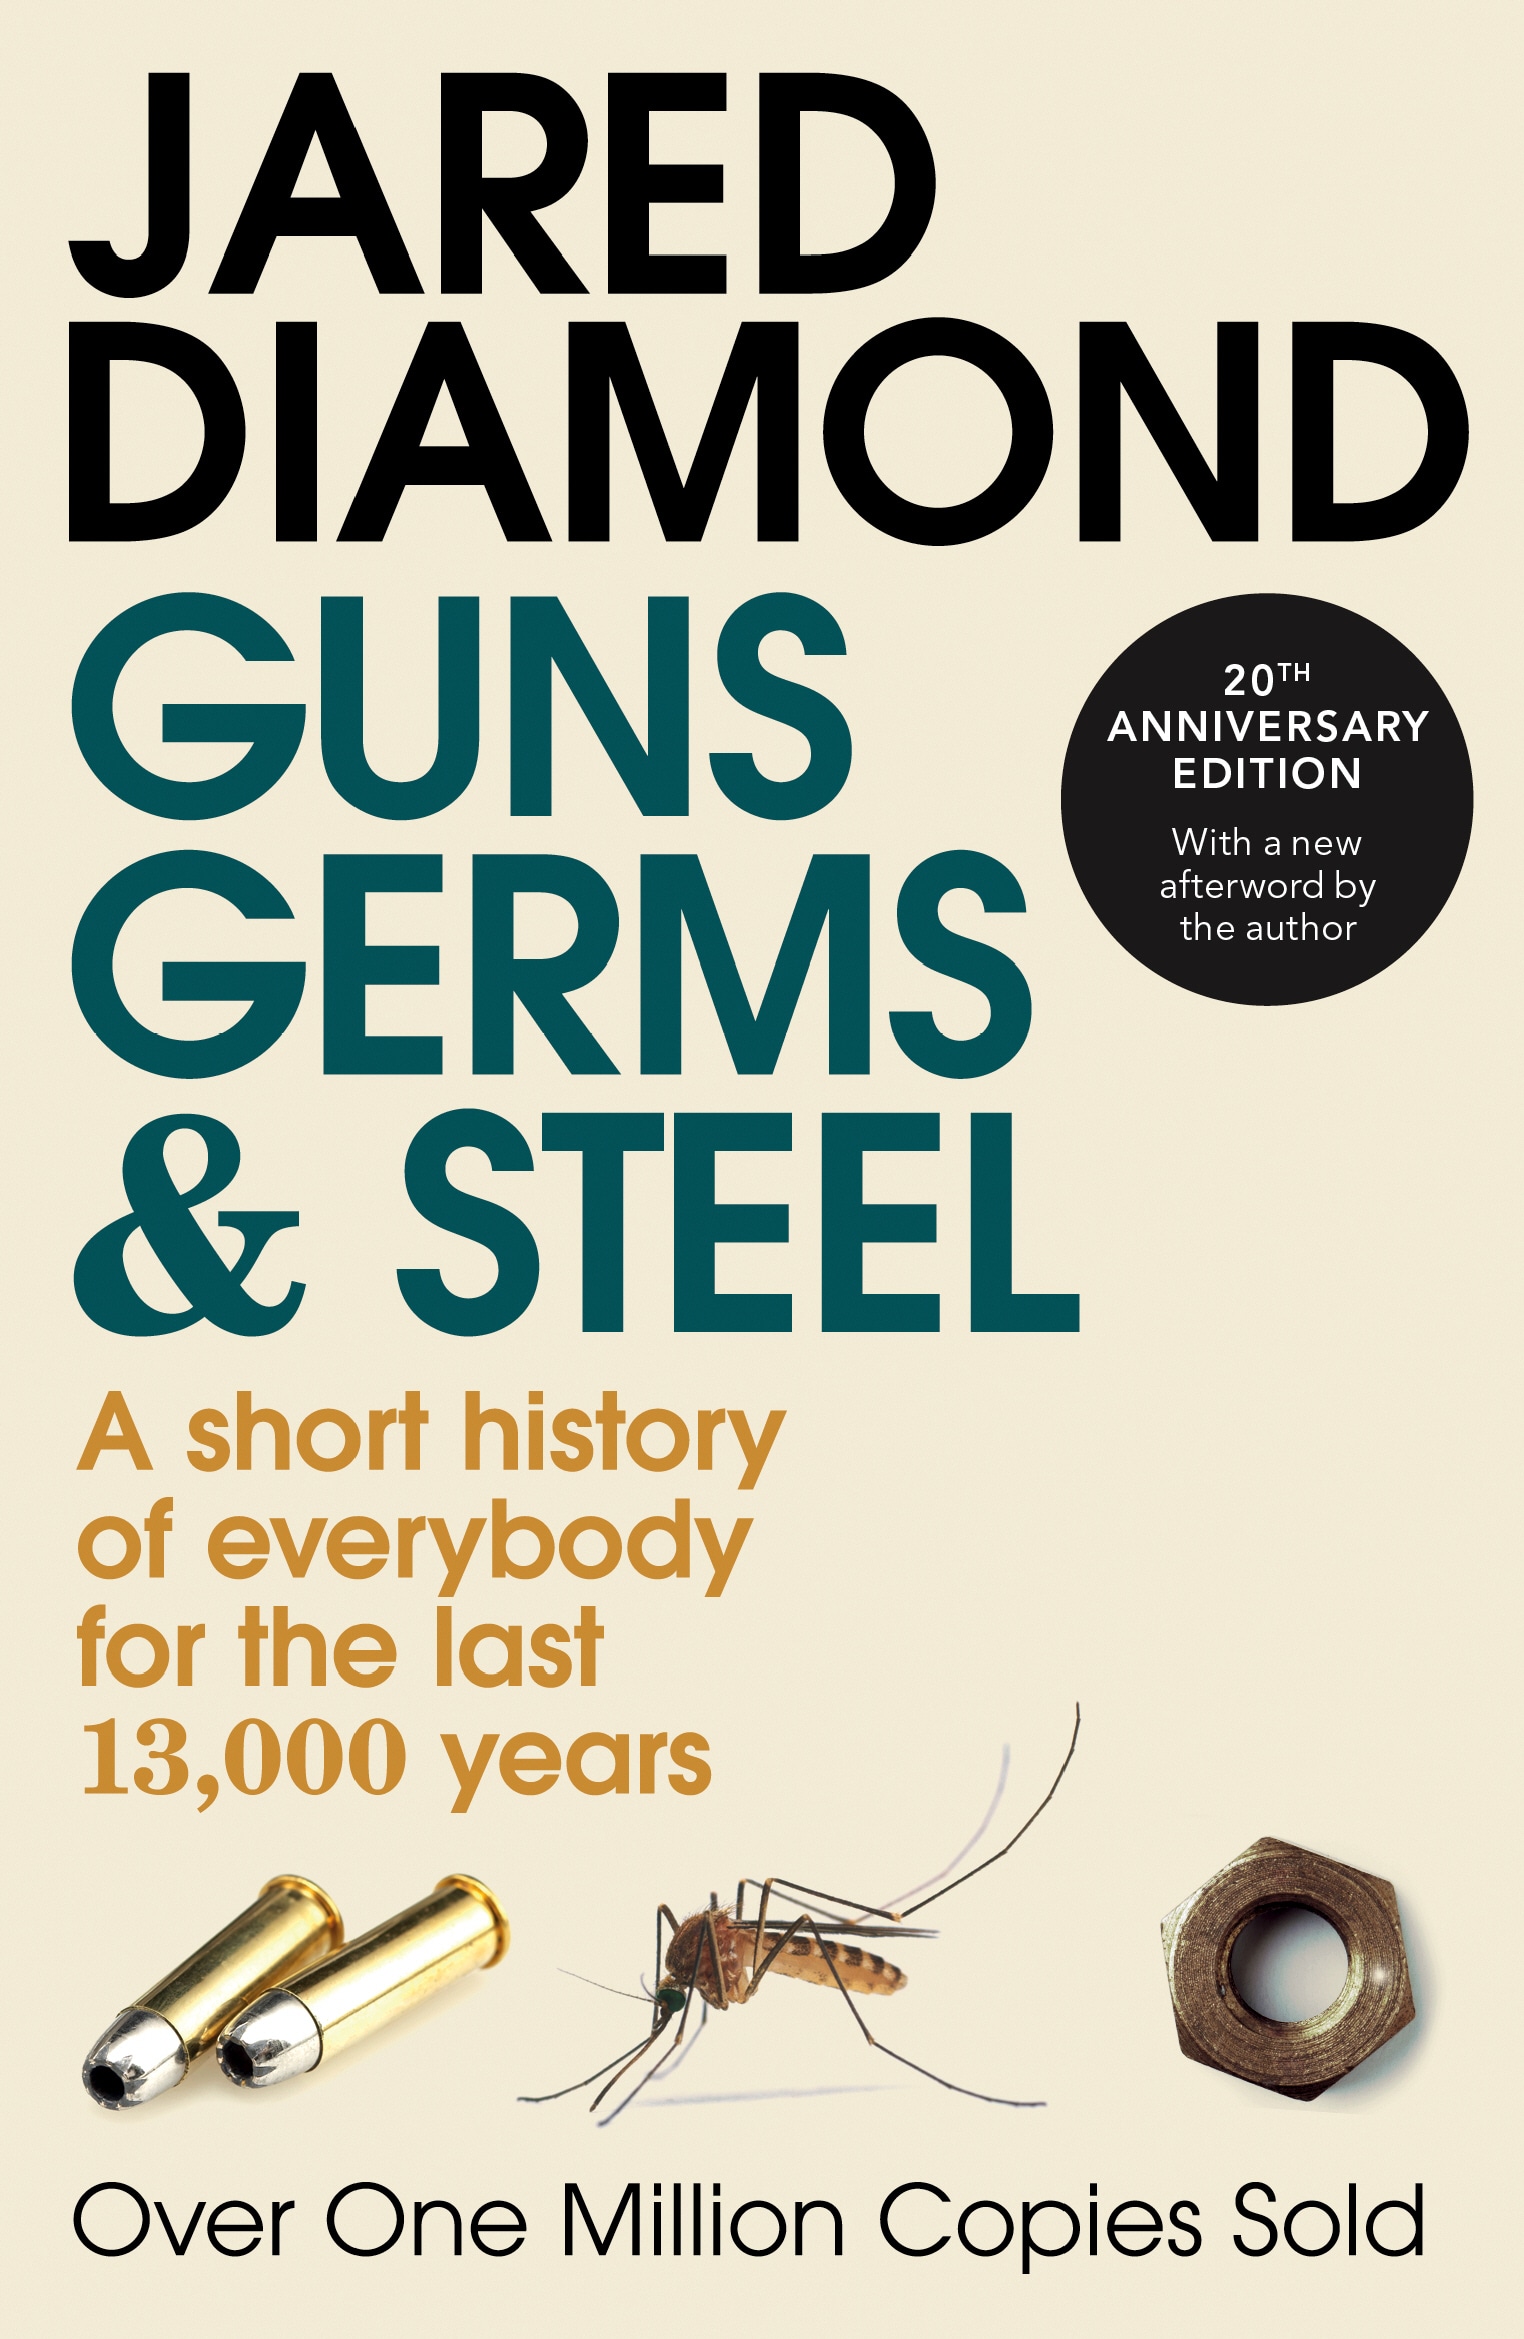 Book “Guns, Germs and Steel” by Jared Diamond — April 30, 1998